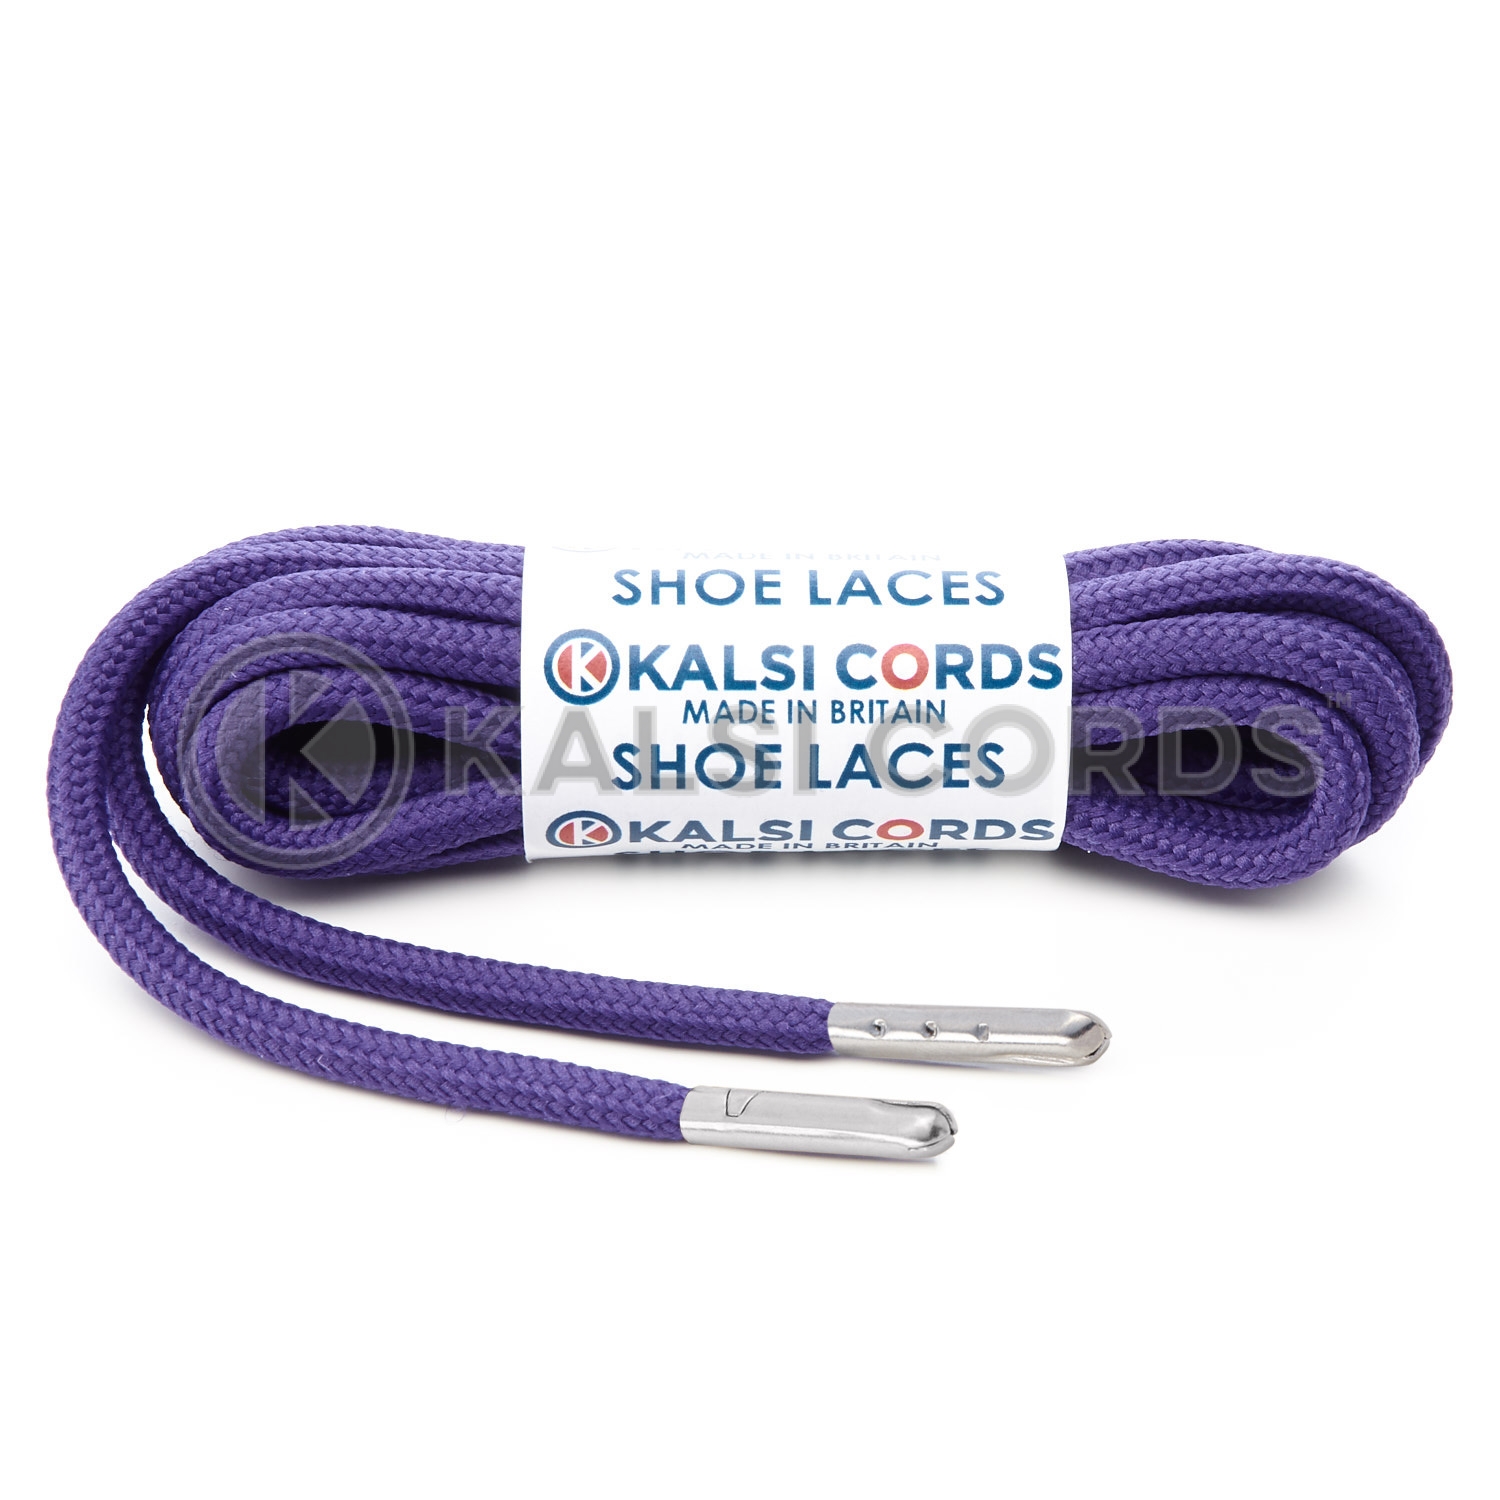 T621 5mm Round Polyester Shoe Laces Purple 1 Silver Metal Tip Kalsi Cords